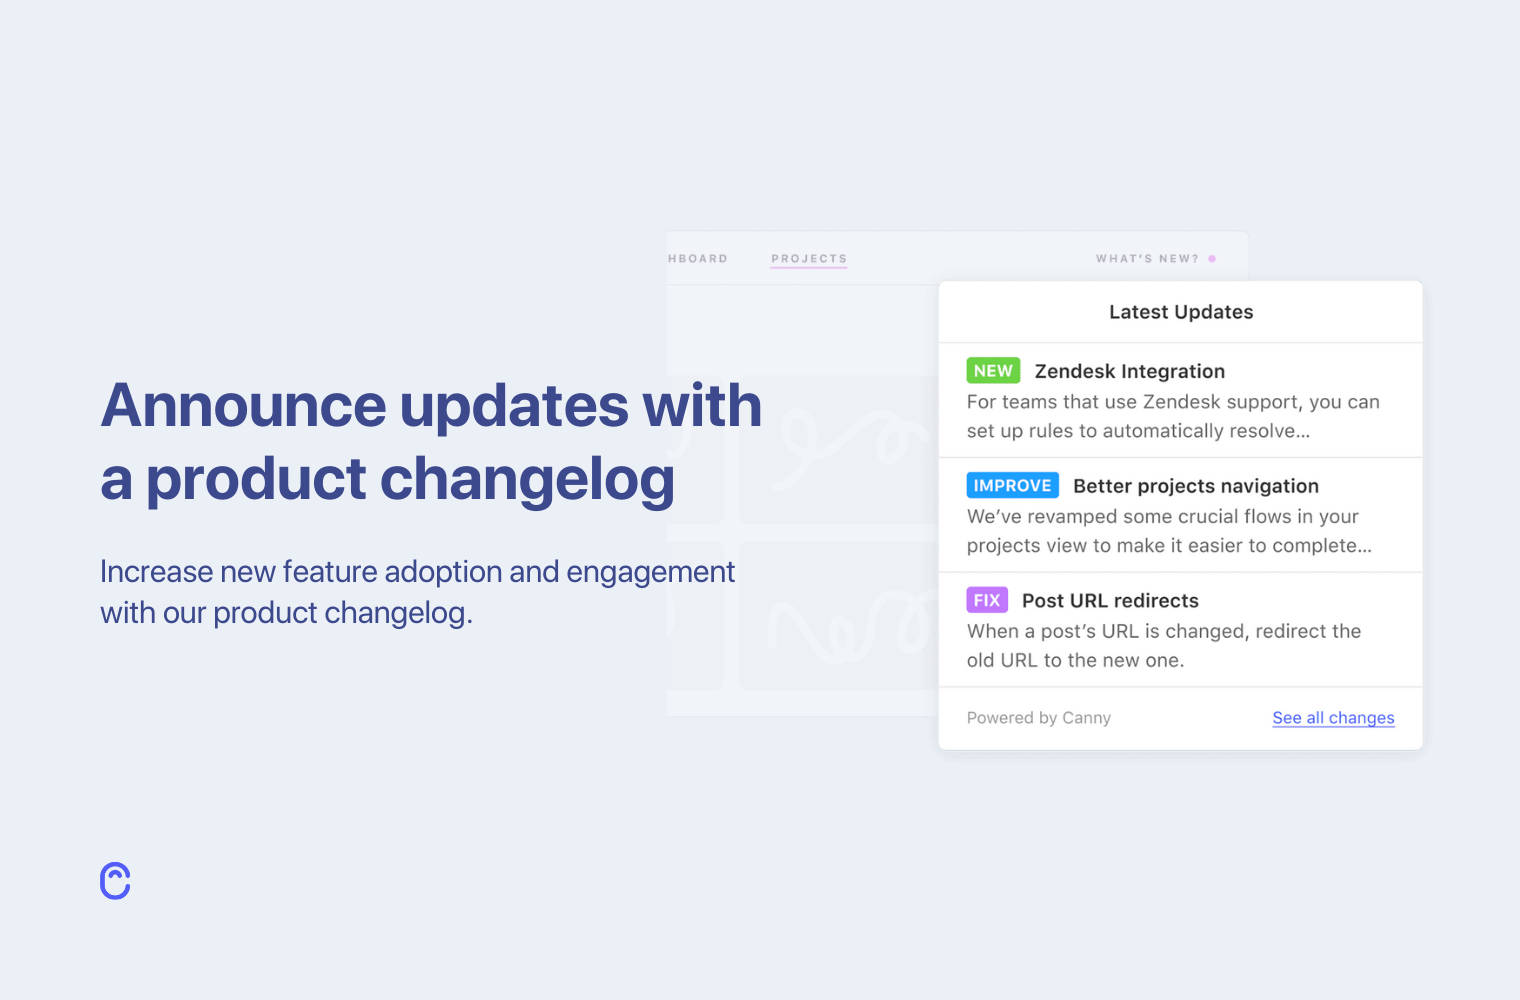 Increase new feature adoption and engagement with our product changelog.